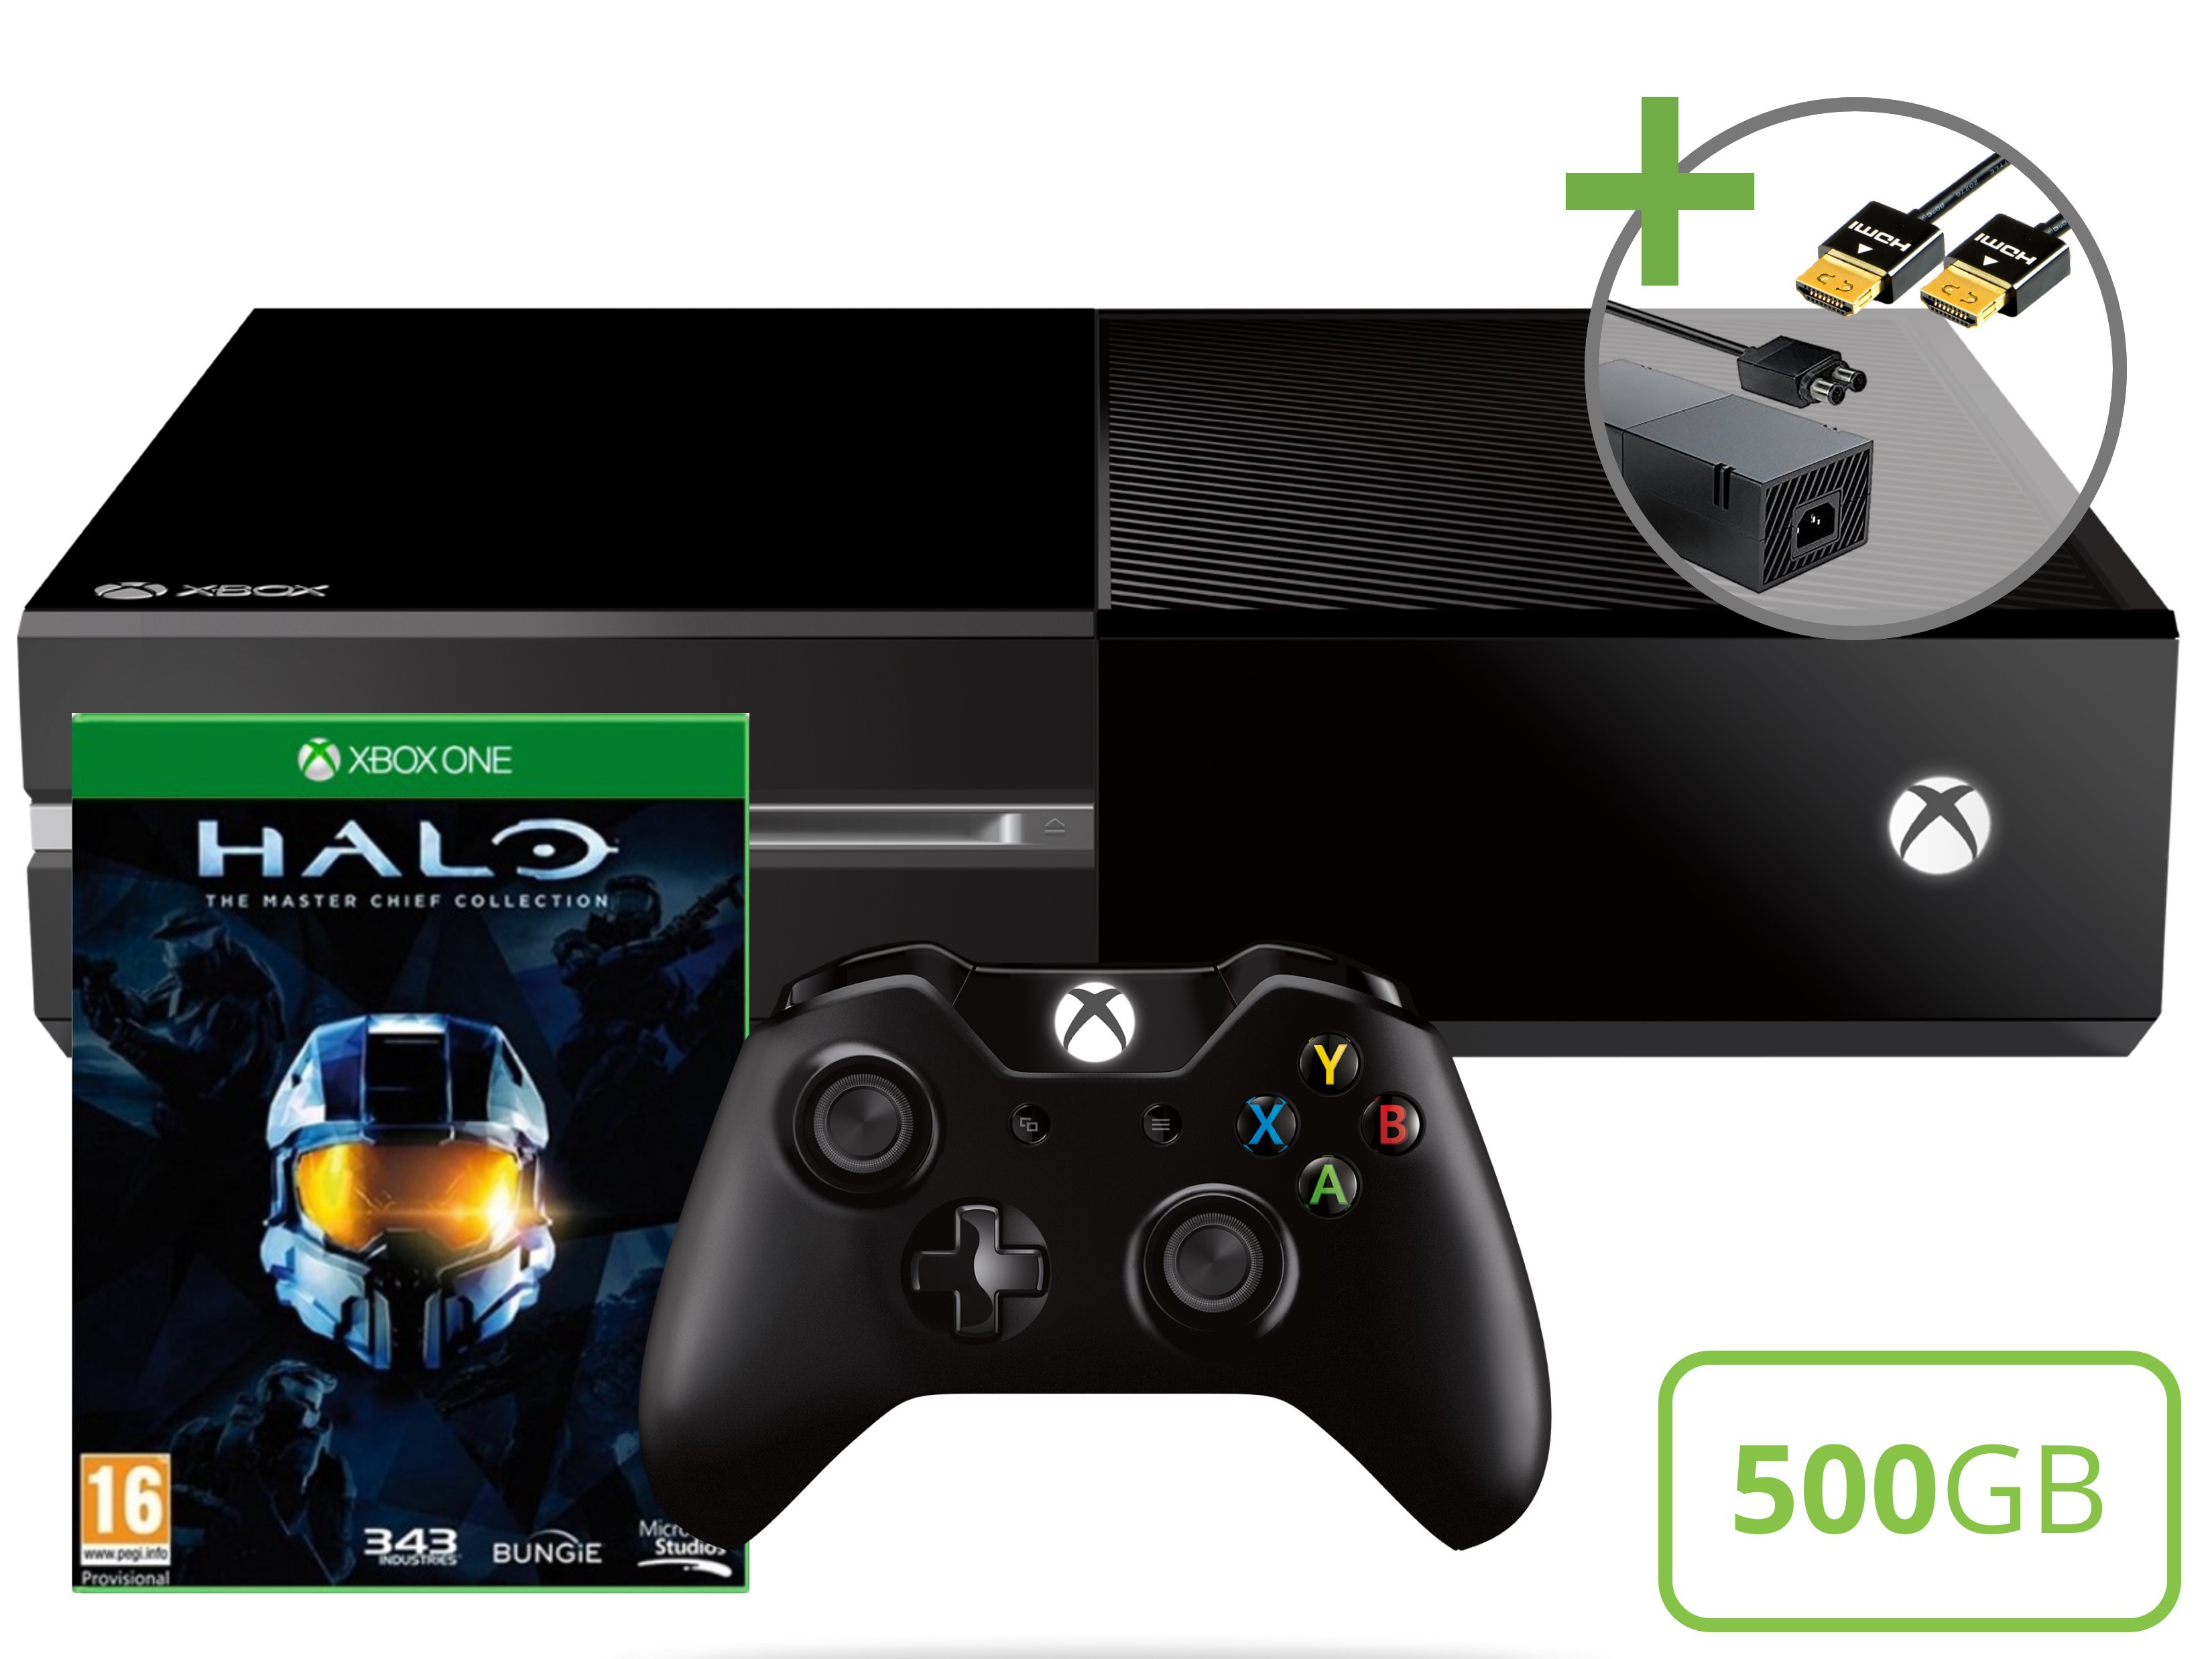 Microsoft Xbox One Starter Pack - 500GB Halo The Master Chief Collection Edition Kopen | Xbox One Hardware